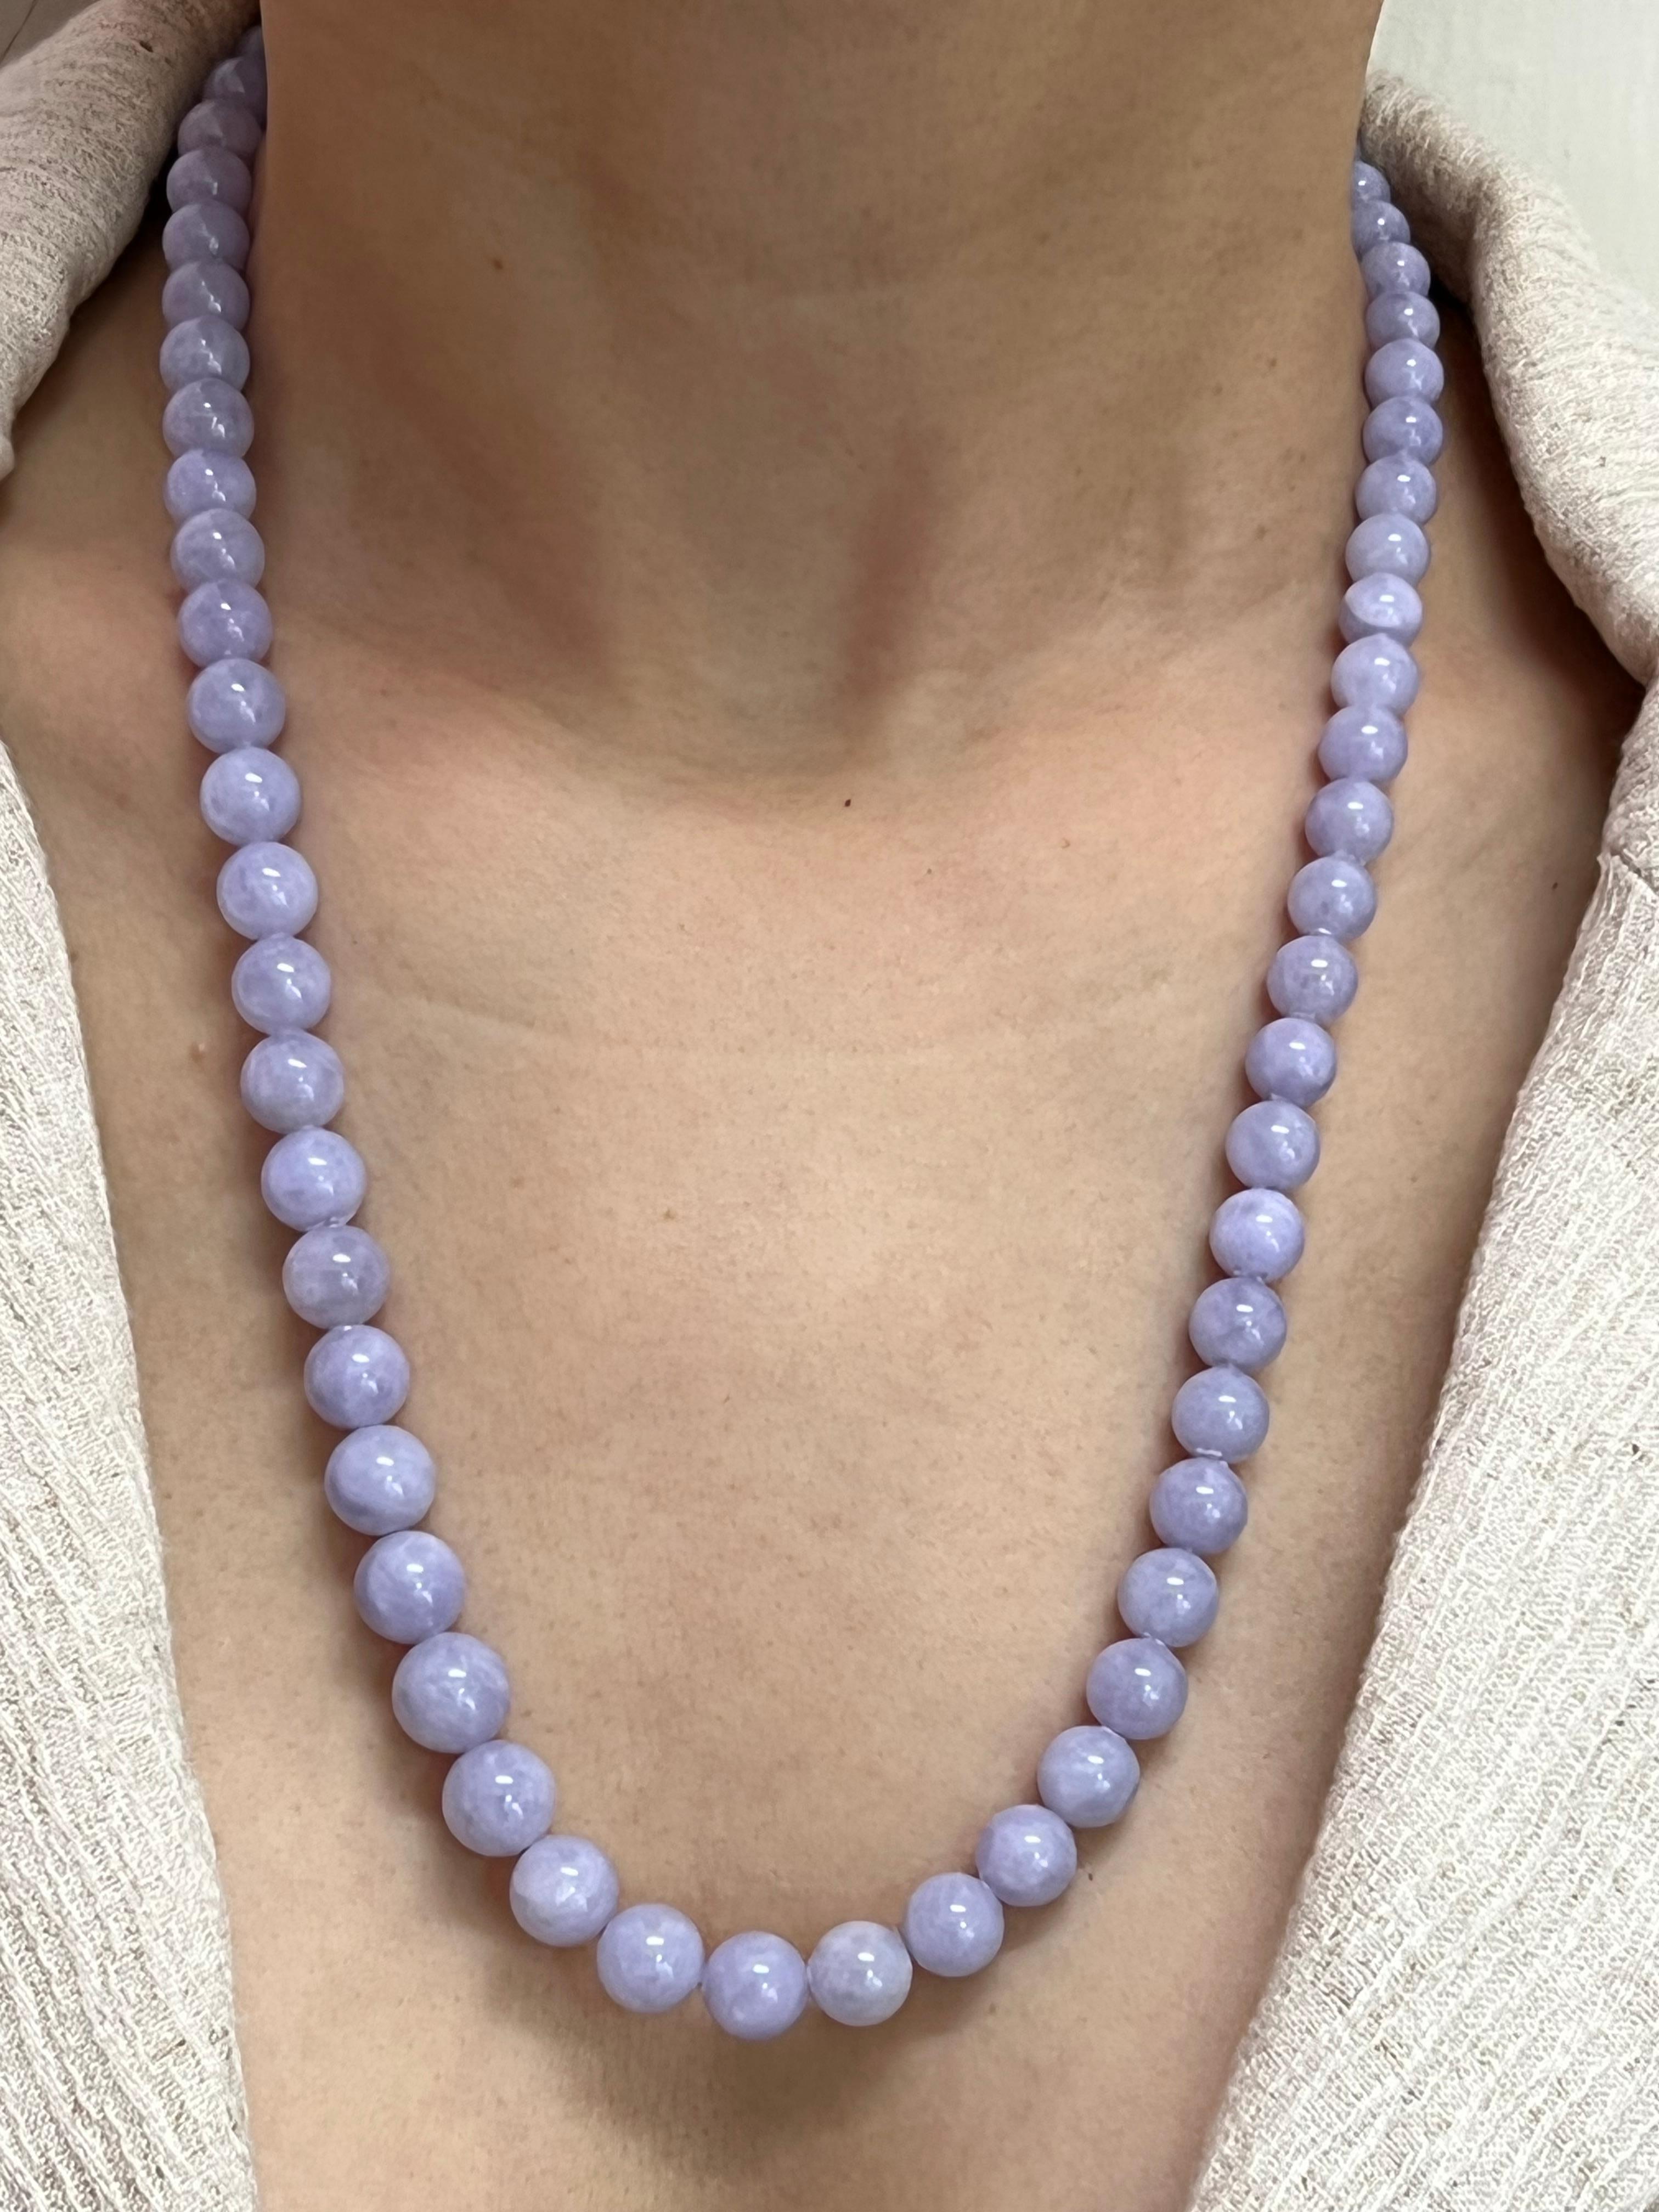 Please check out the HD video! For your consideration is an important natural lavender jade and diamond necklace. Natural Lavender jade beads of this color is rare and not often seen. There are 67 jade beads ranging from 6.4mm - 10.10mm in size.